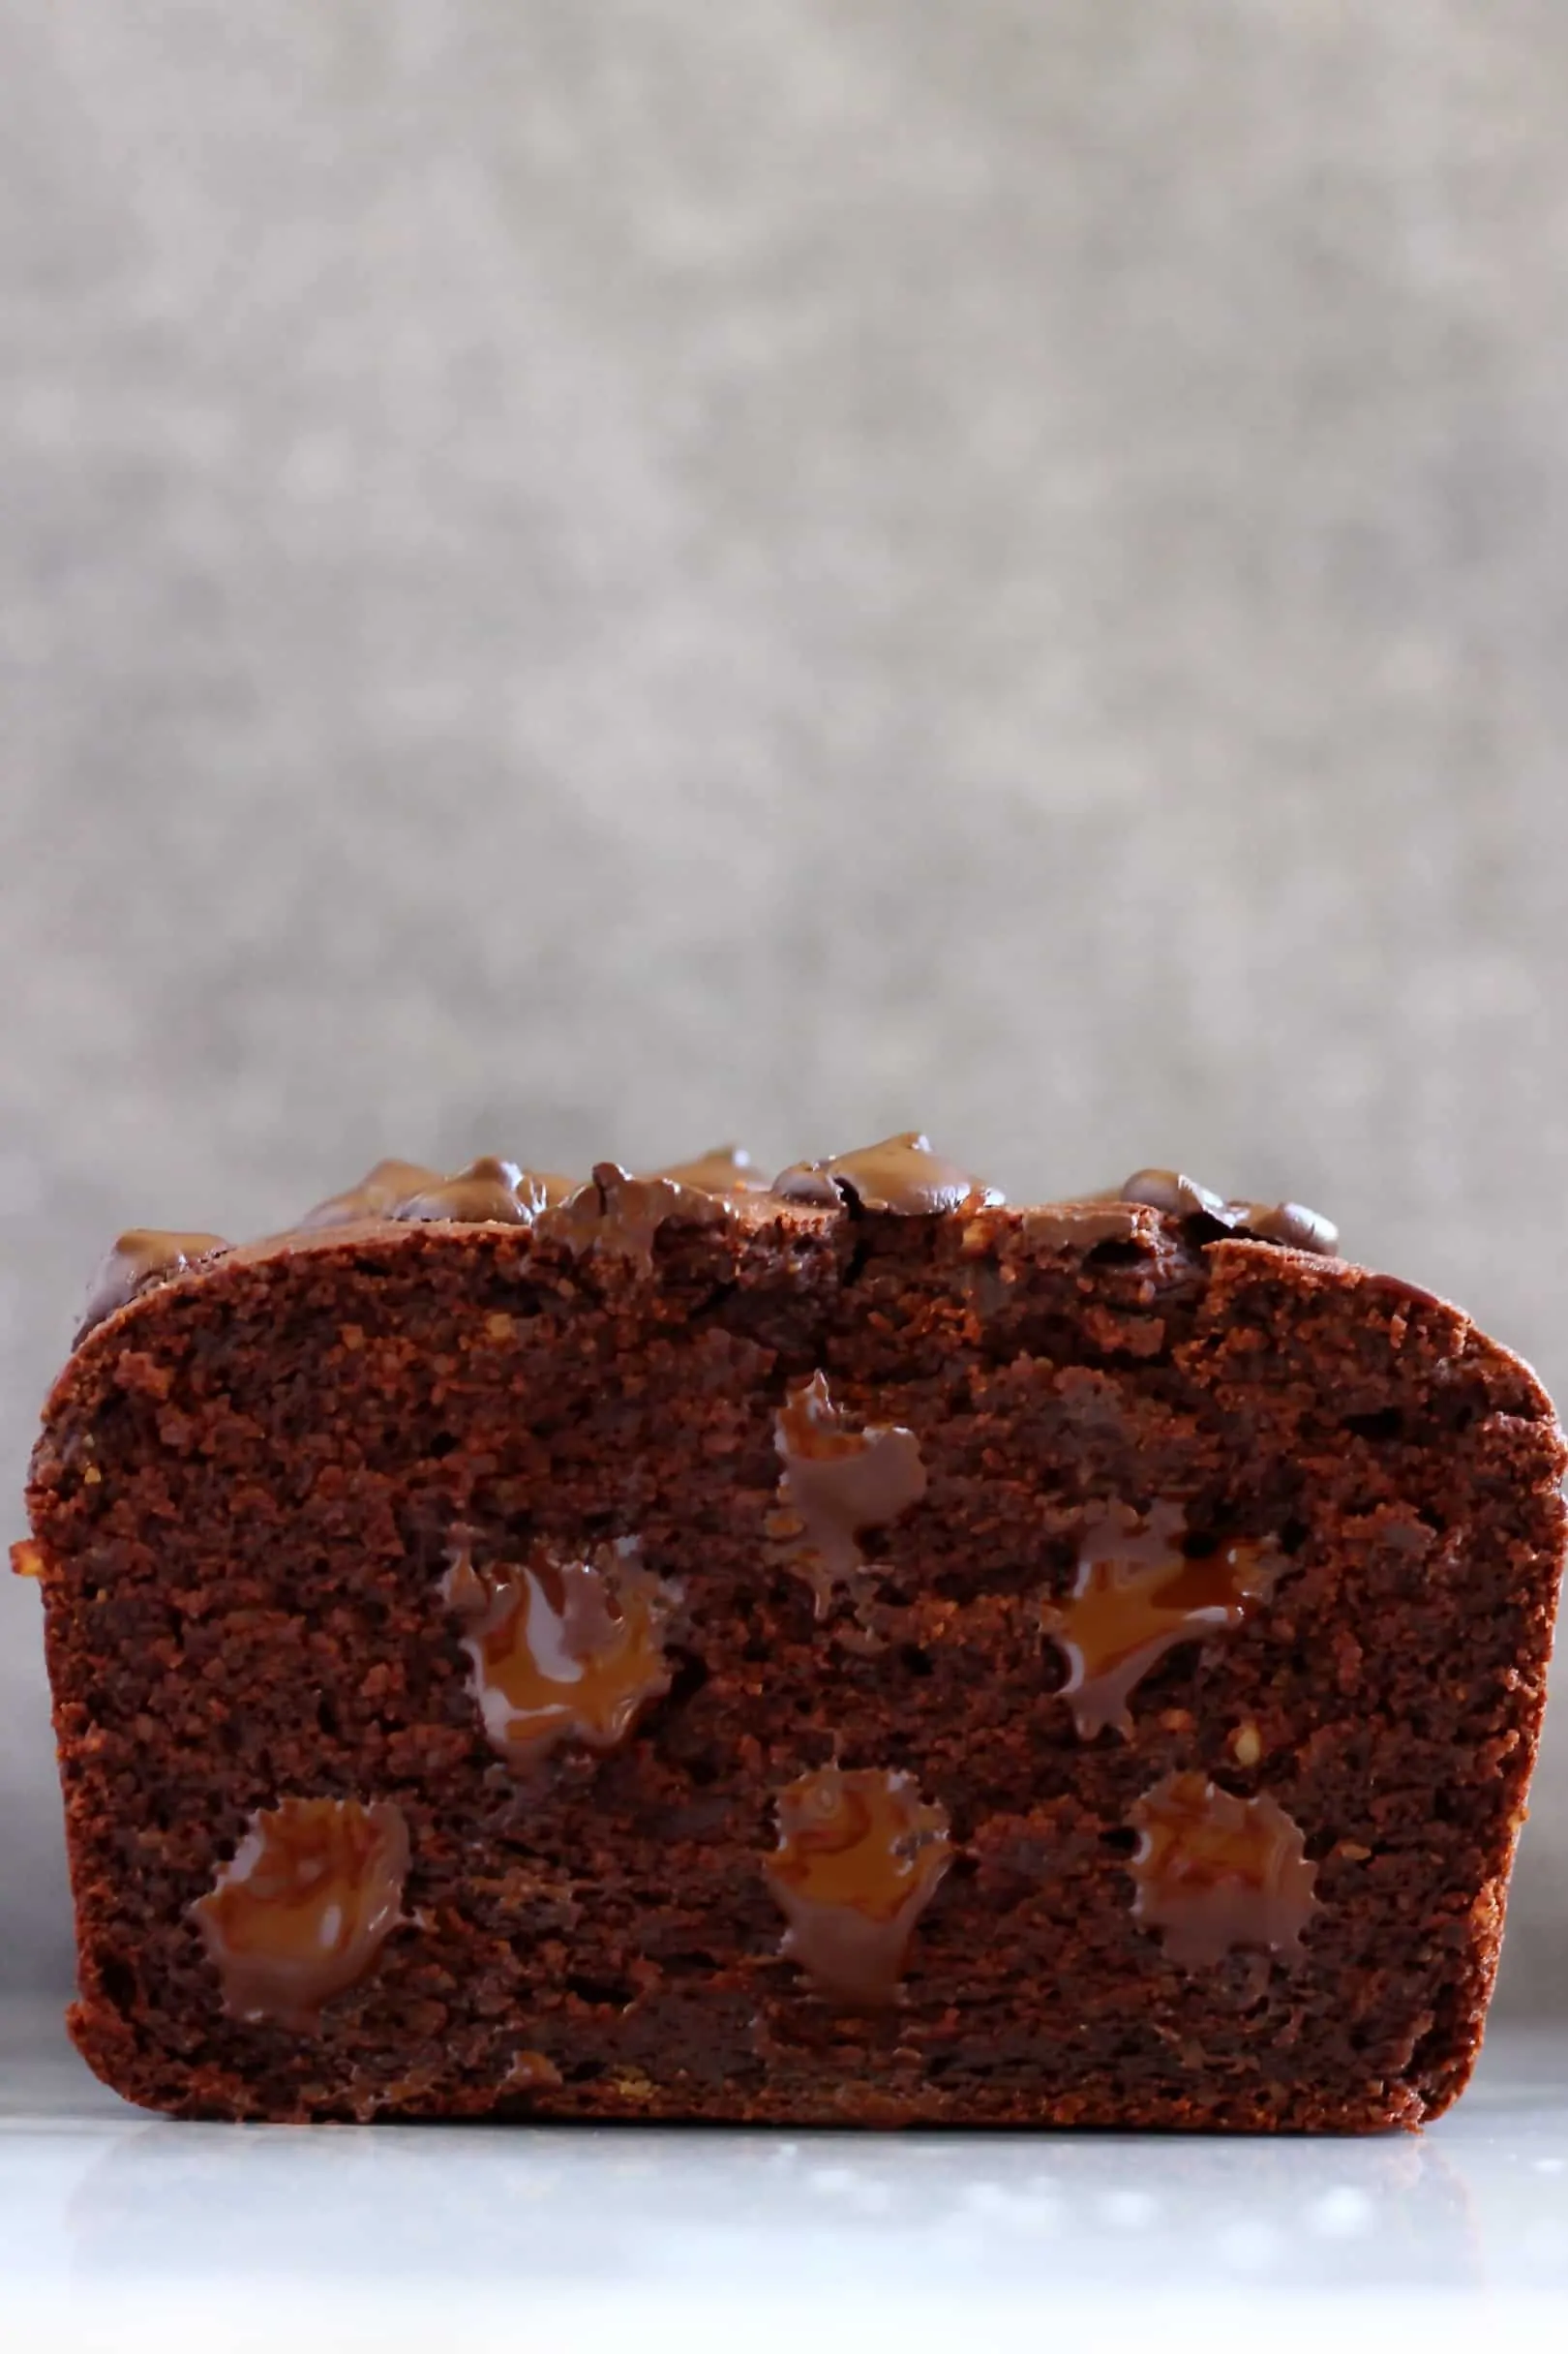 Sliced sweet potato chocolate loaf cake with chocolate chips against a grey background